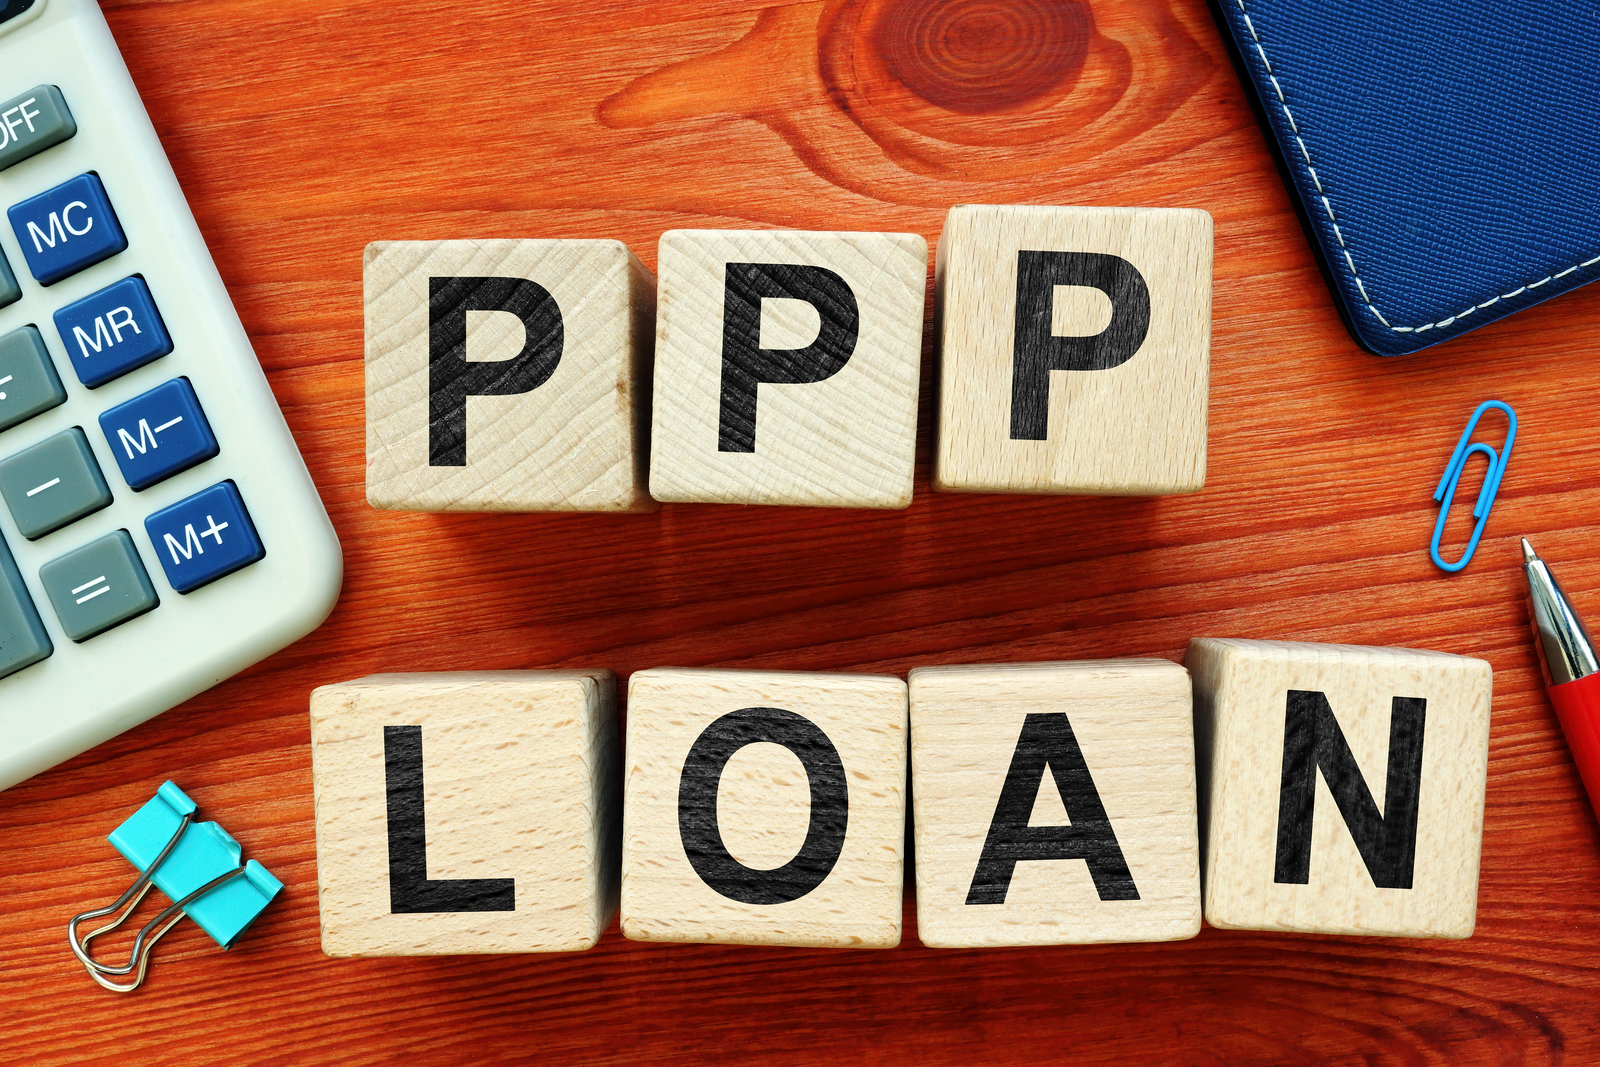 PPP Loan Tax Features